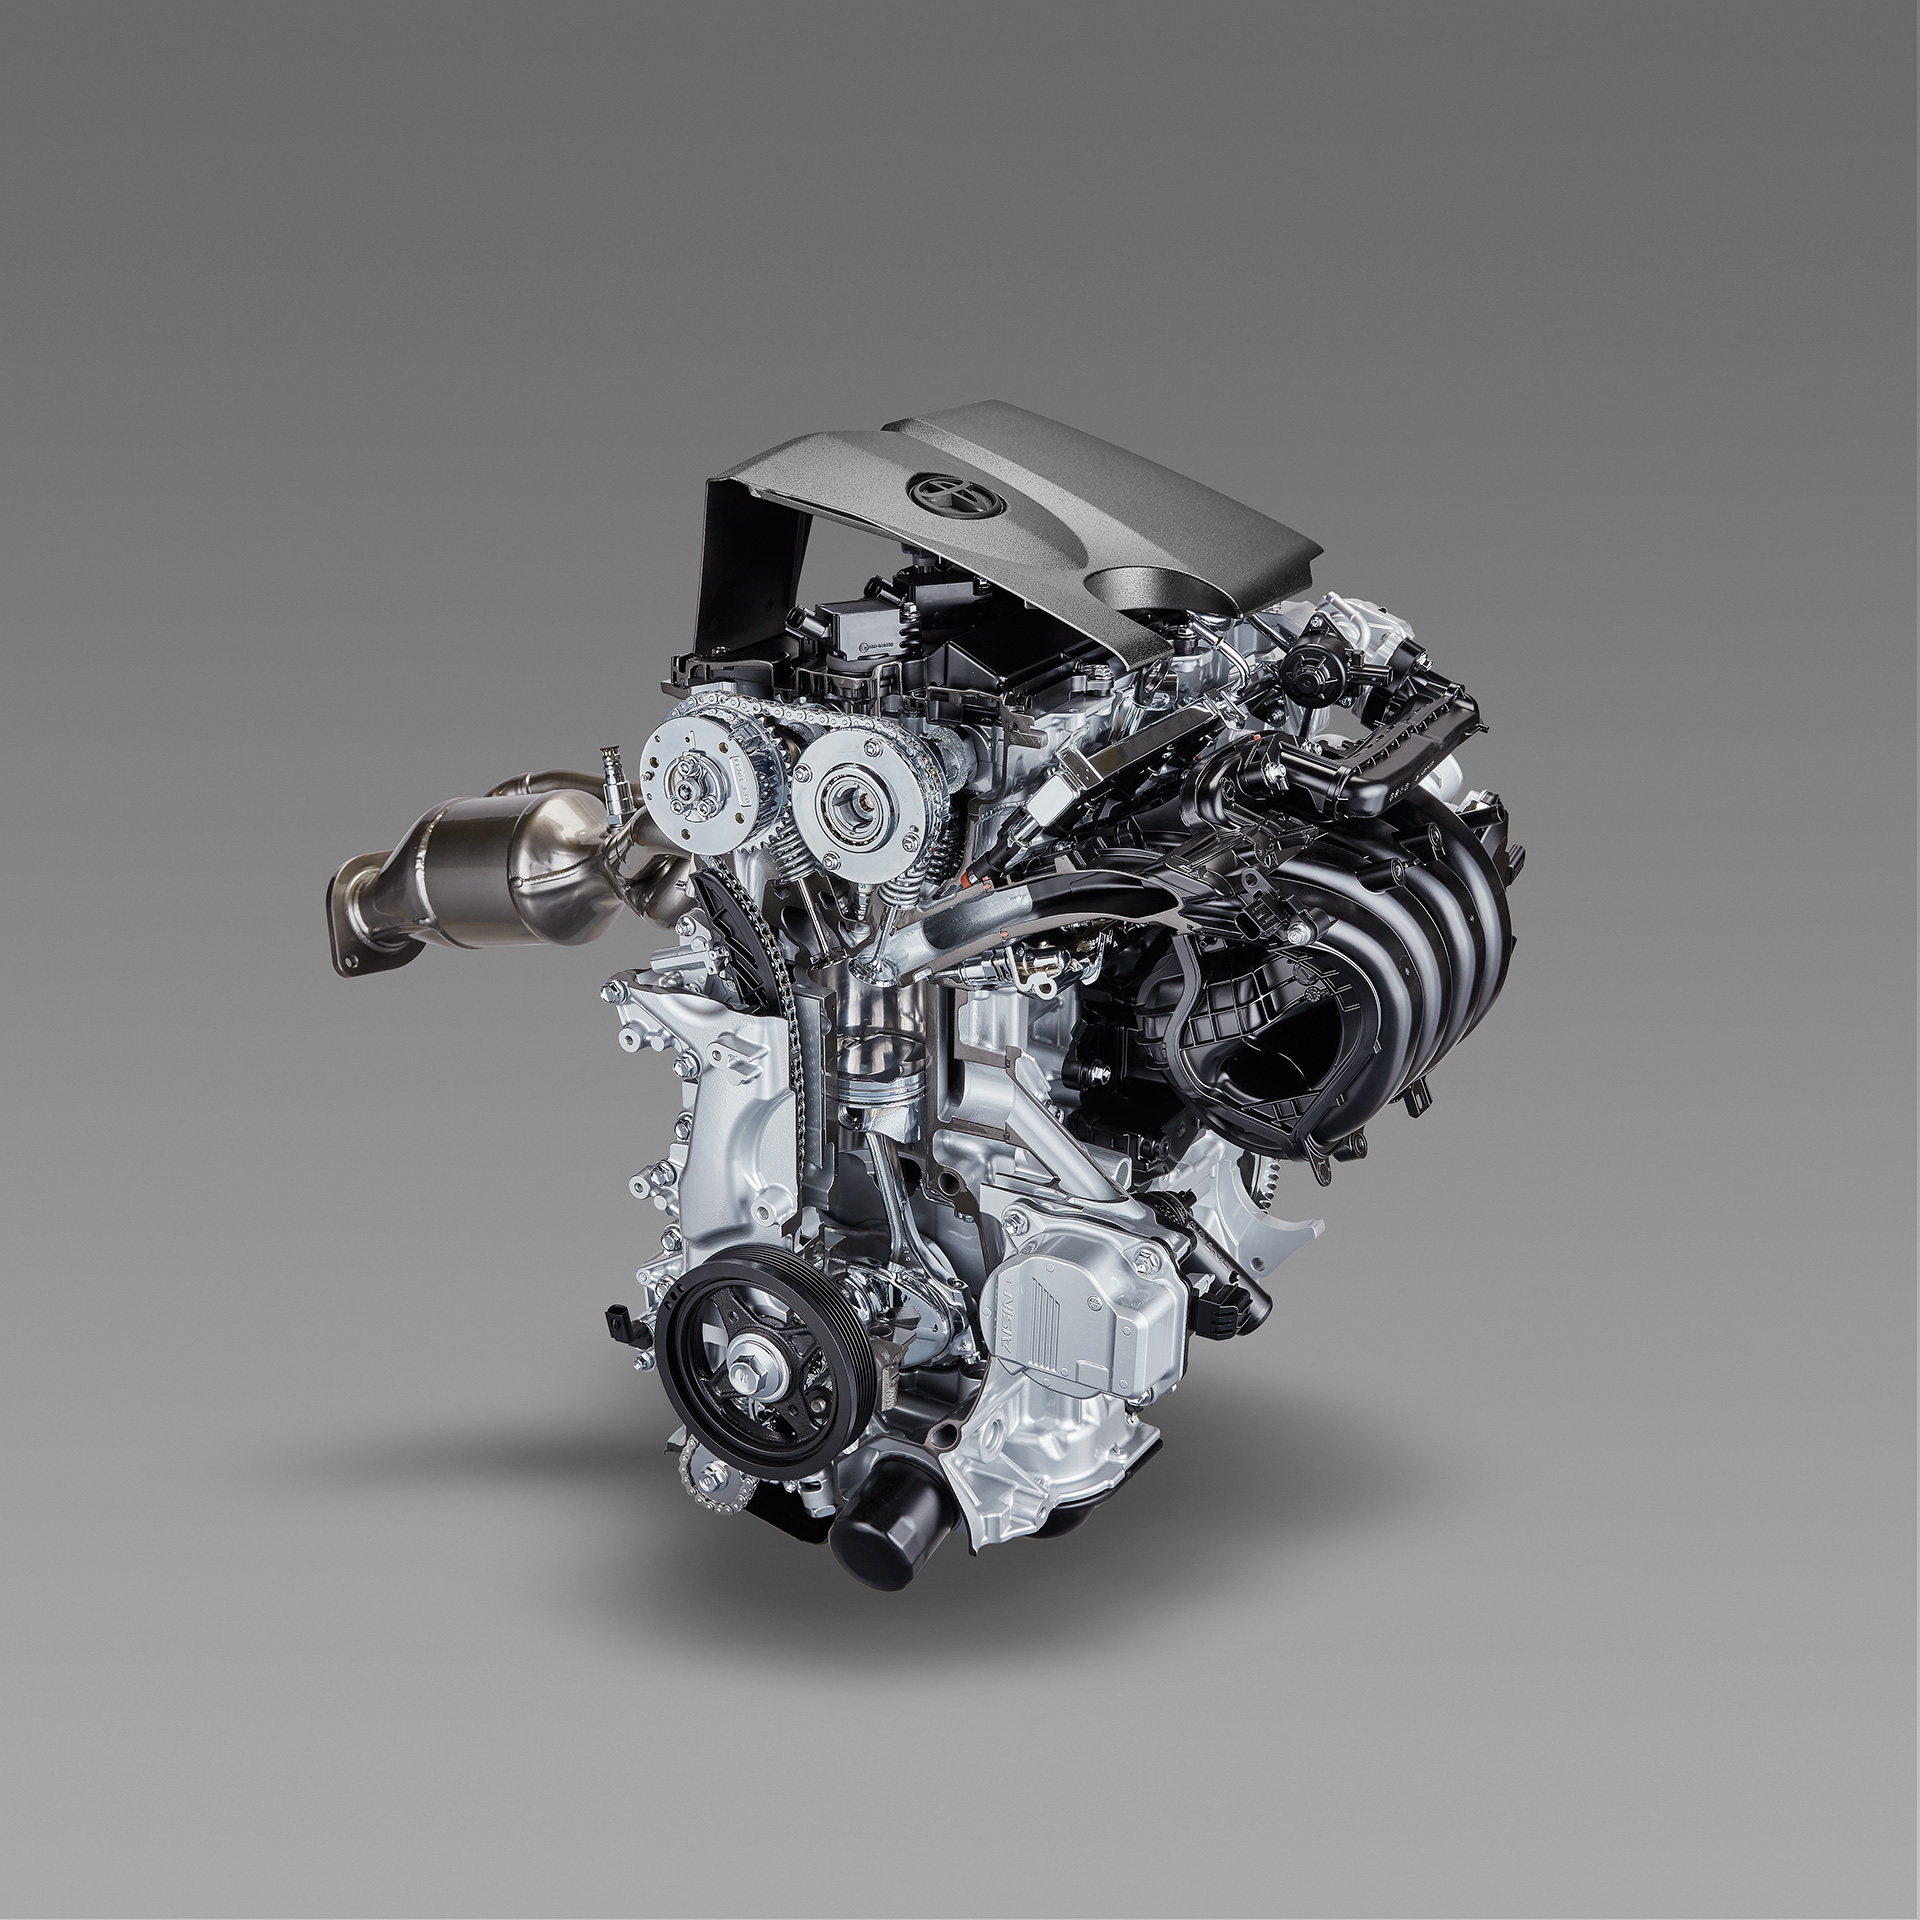 2 0 Liter Dynamic Force Engine A New 2 0 Liter Direct Injection Inline 4 Cylinder Gasoline Engine Toyota S New Powertrain Tnga Mobility Toyota Motor Corporation Official Global Website